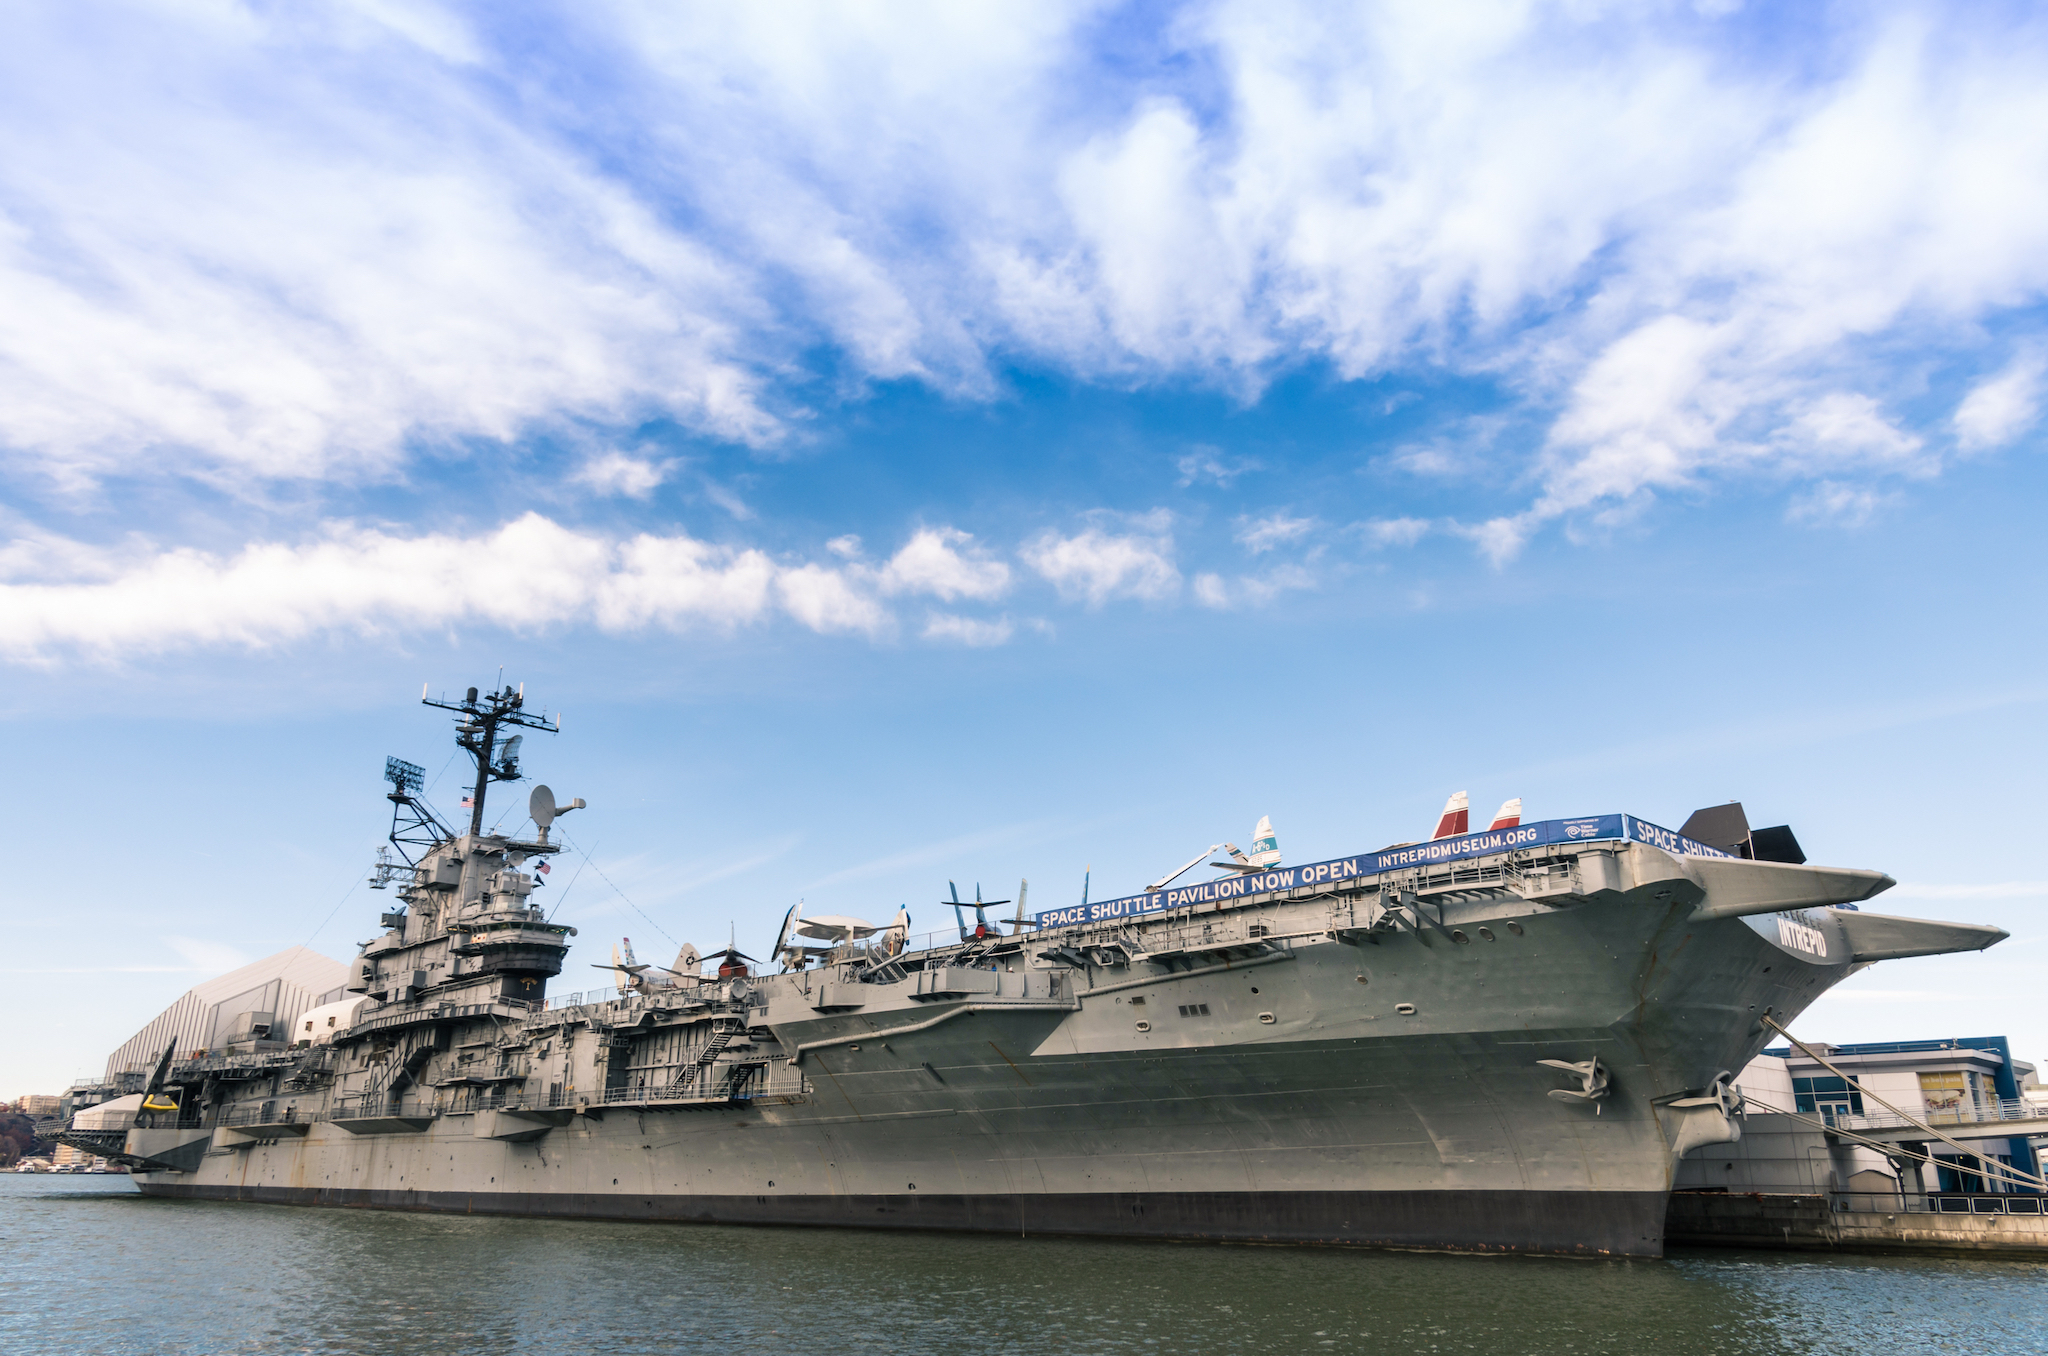 The Intrepid Museum just announced a massive expansion at Hudson River Park